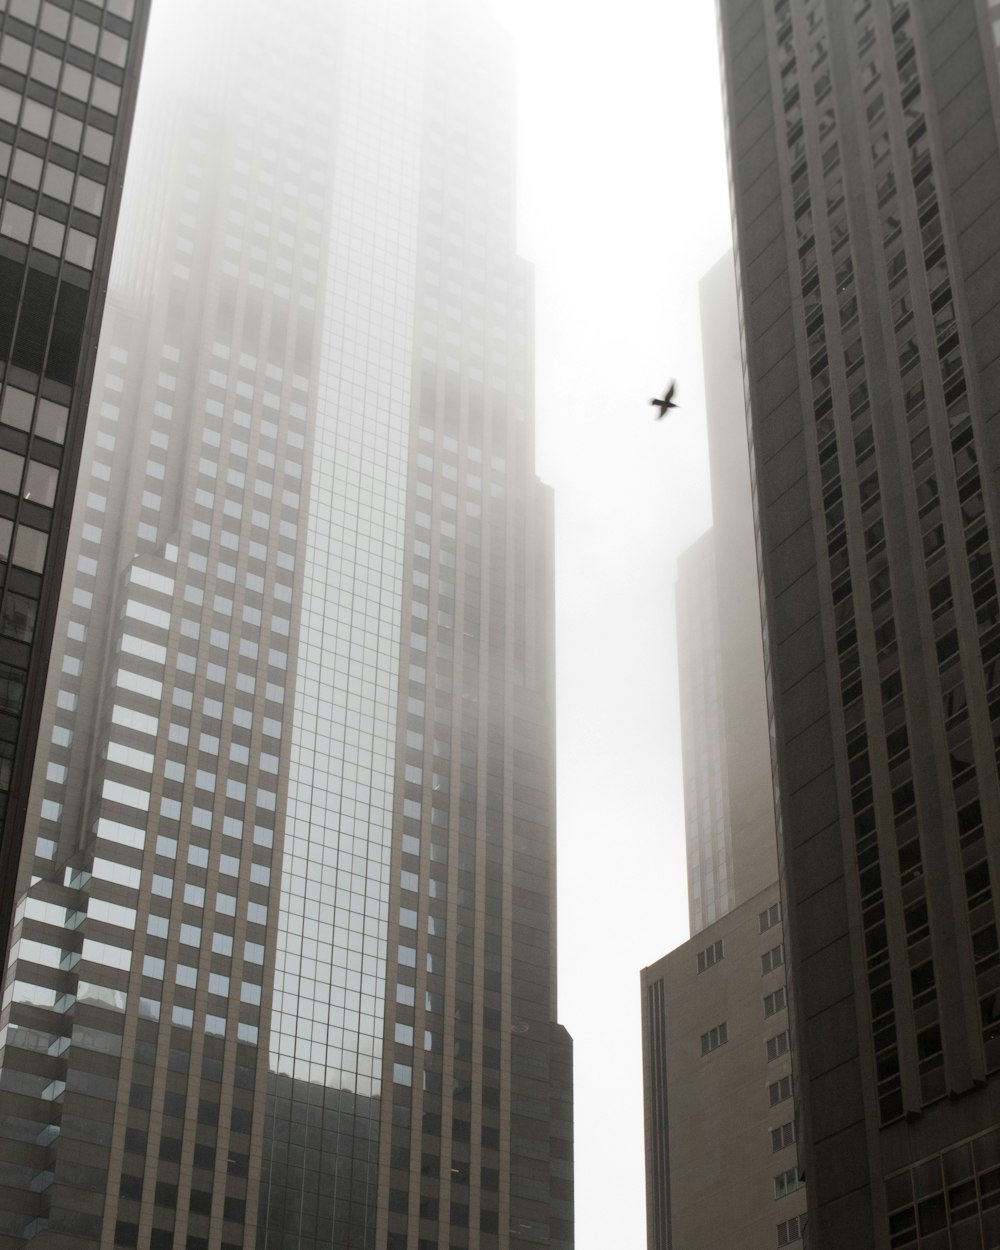 a plane flying through a foggy city with tall buildings